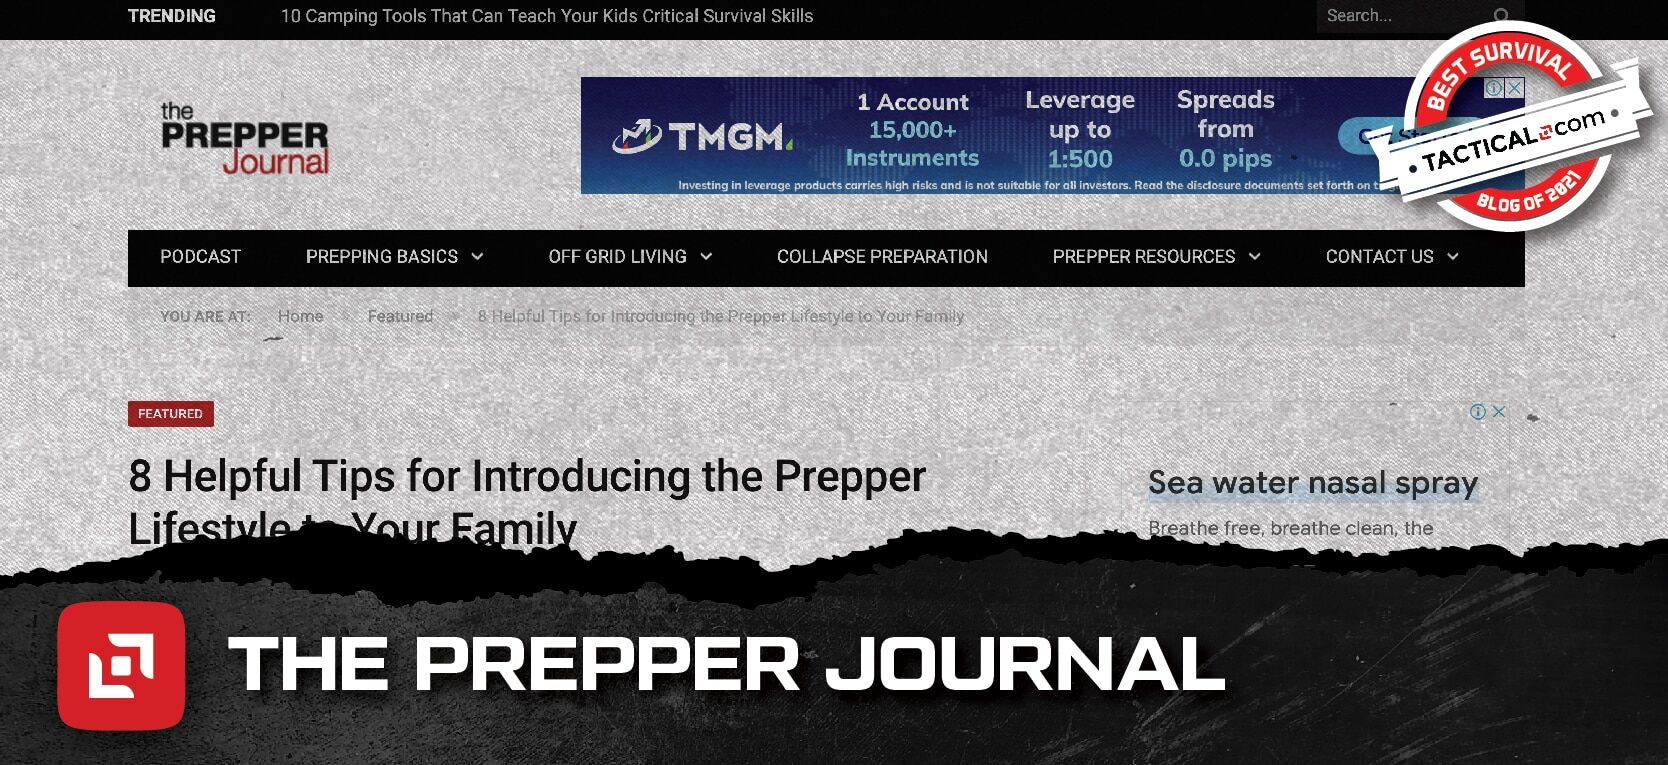 The Prepper Journal homepage